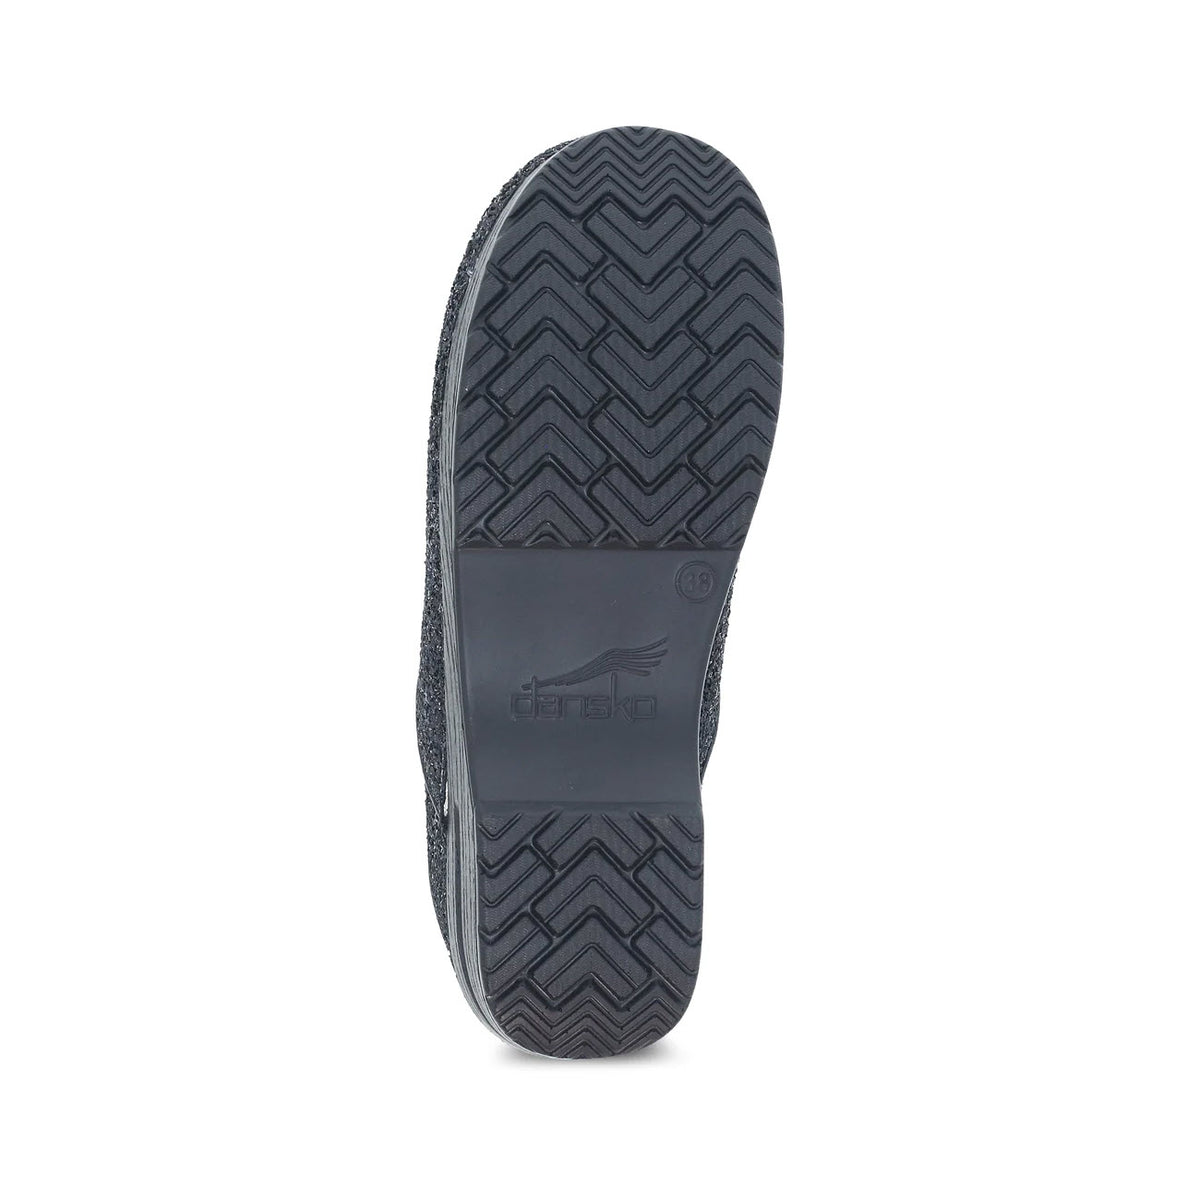 Bottom view of a single Dansko Professional Black Glitter clog displaying its tread pattern and brand logo on the sole.